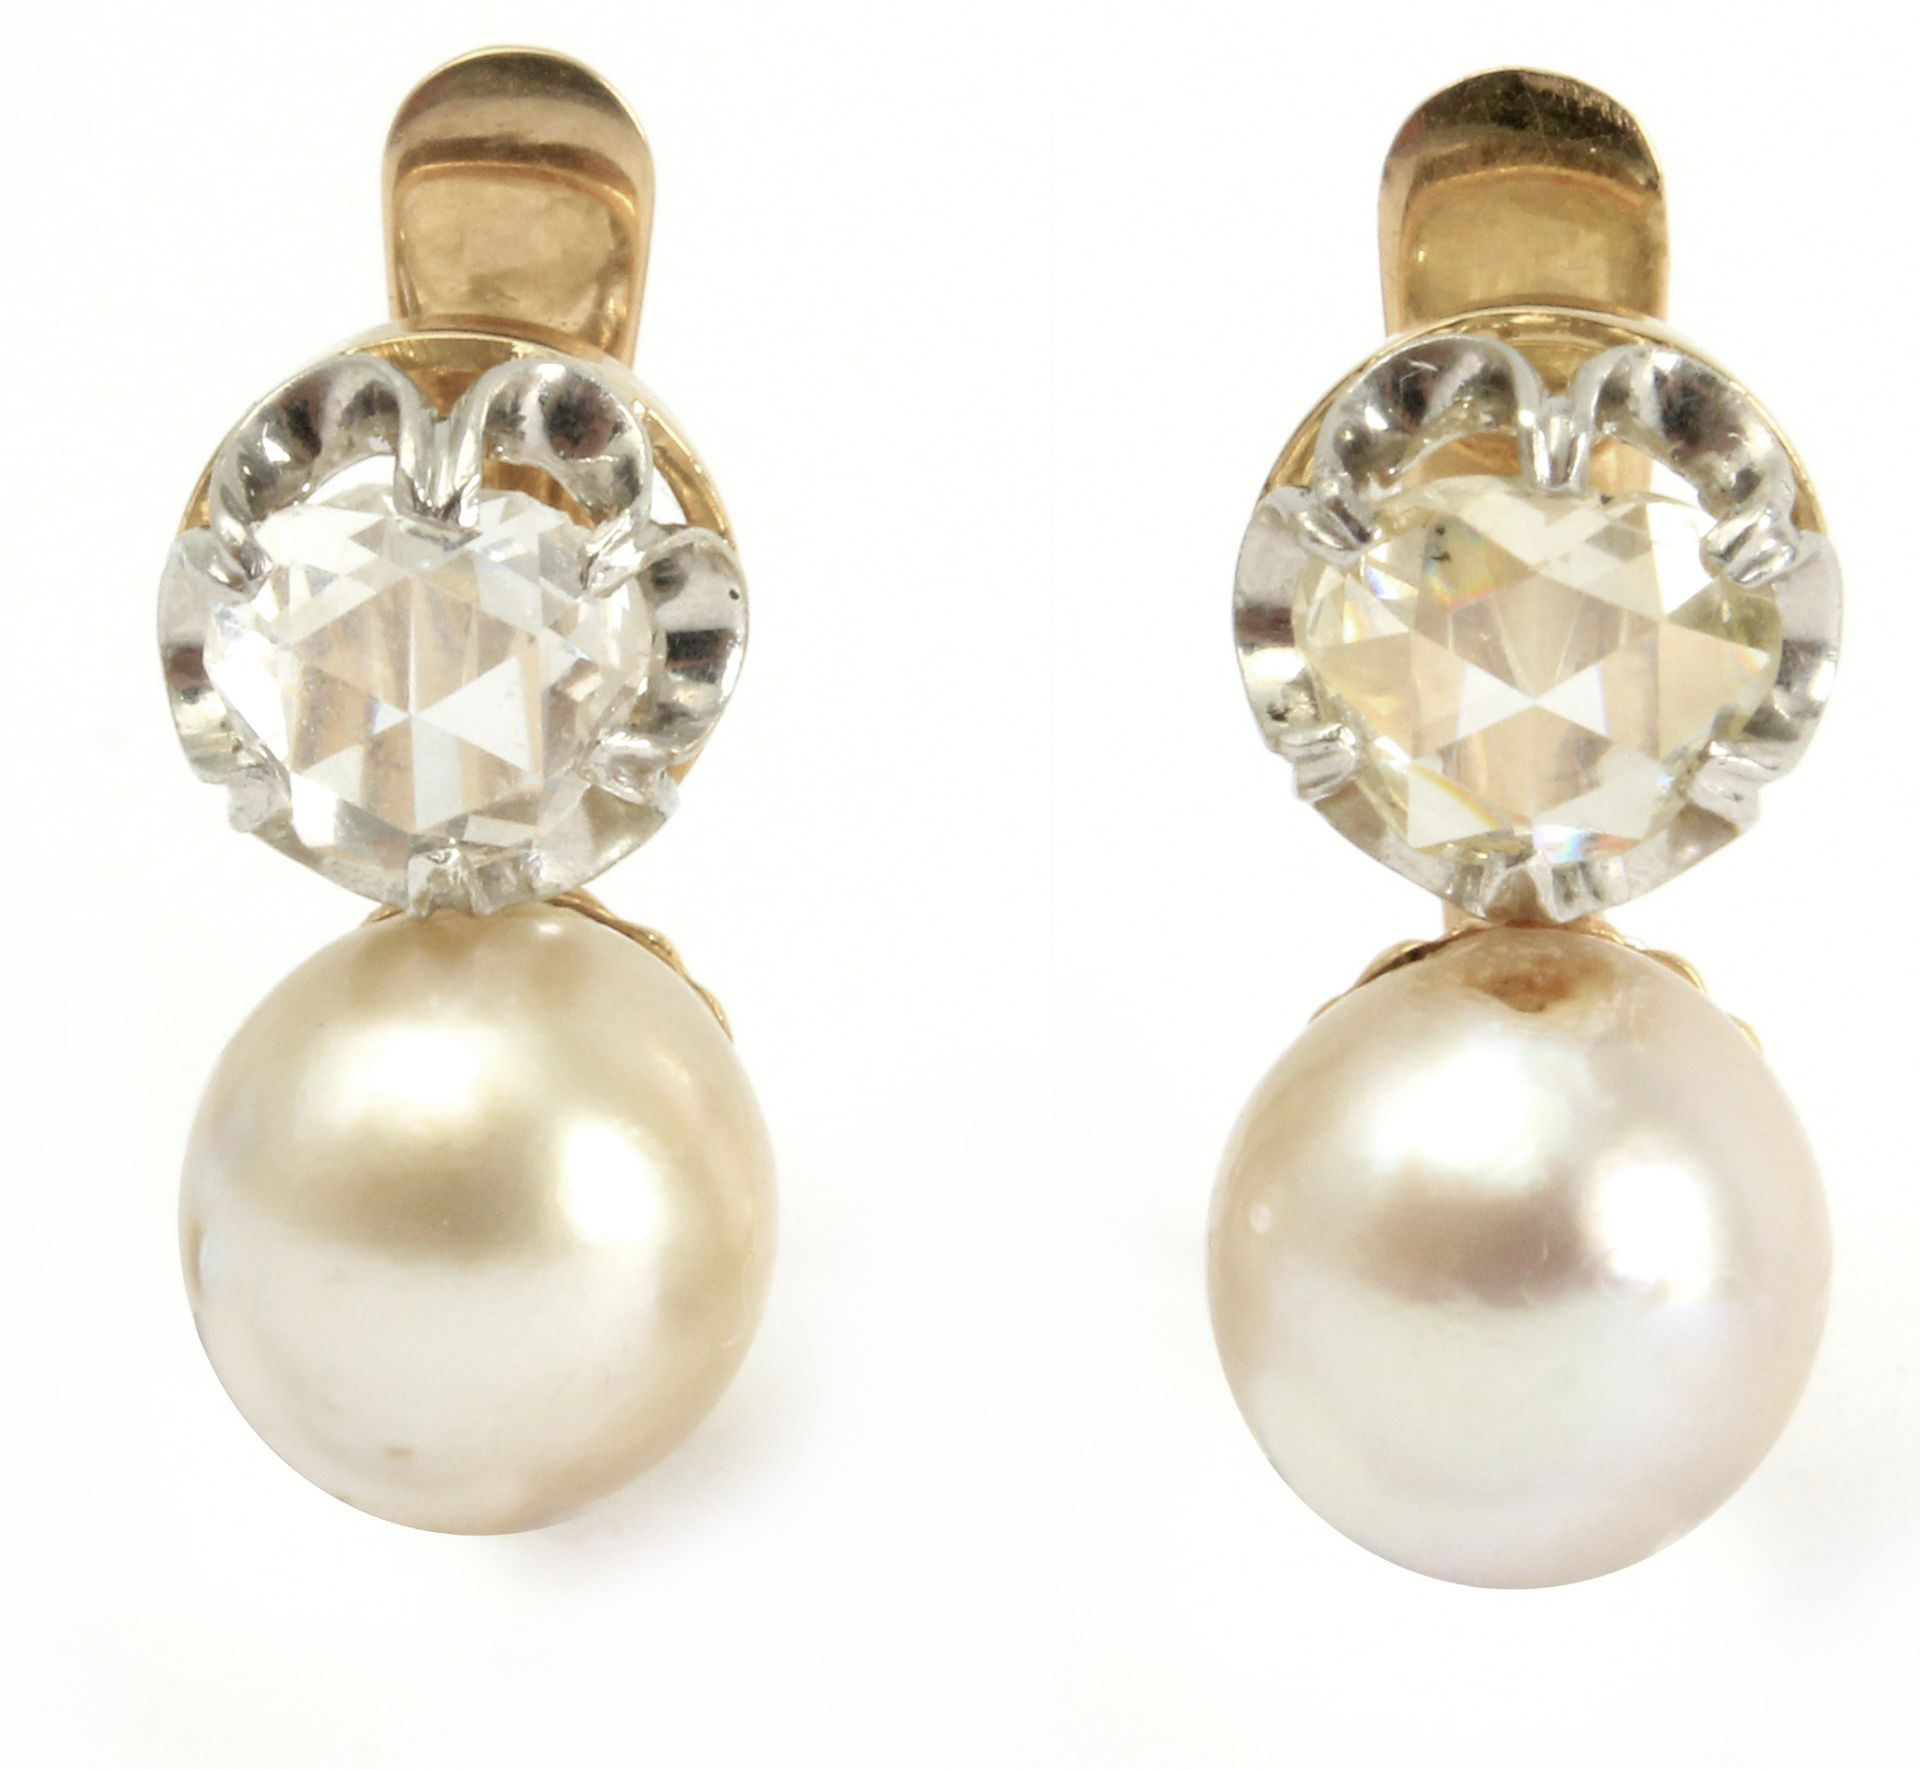 A pair of 'toi et moi' earrings with rose cut diamonds